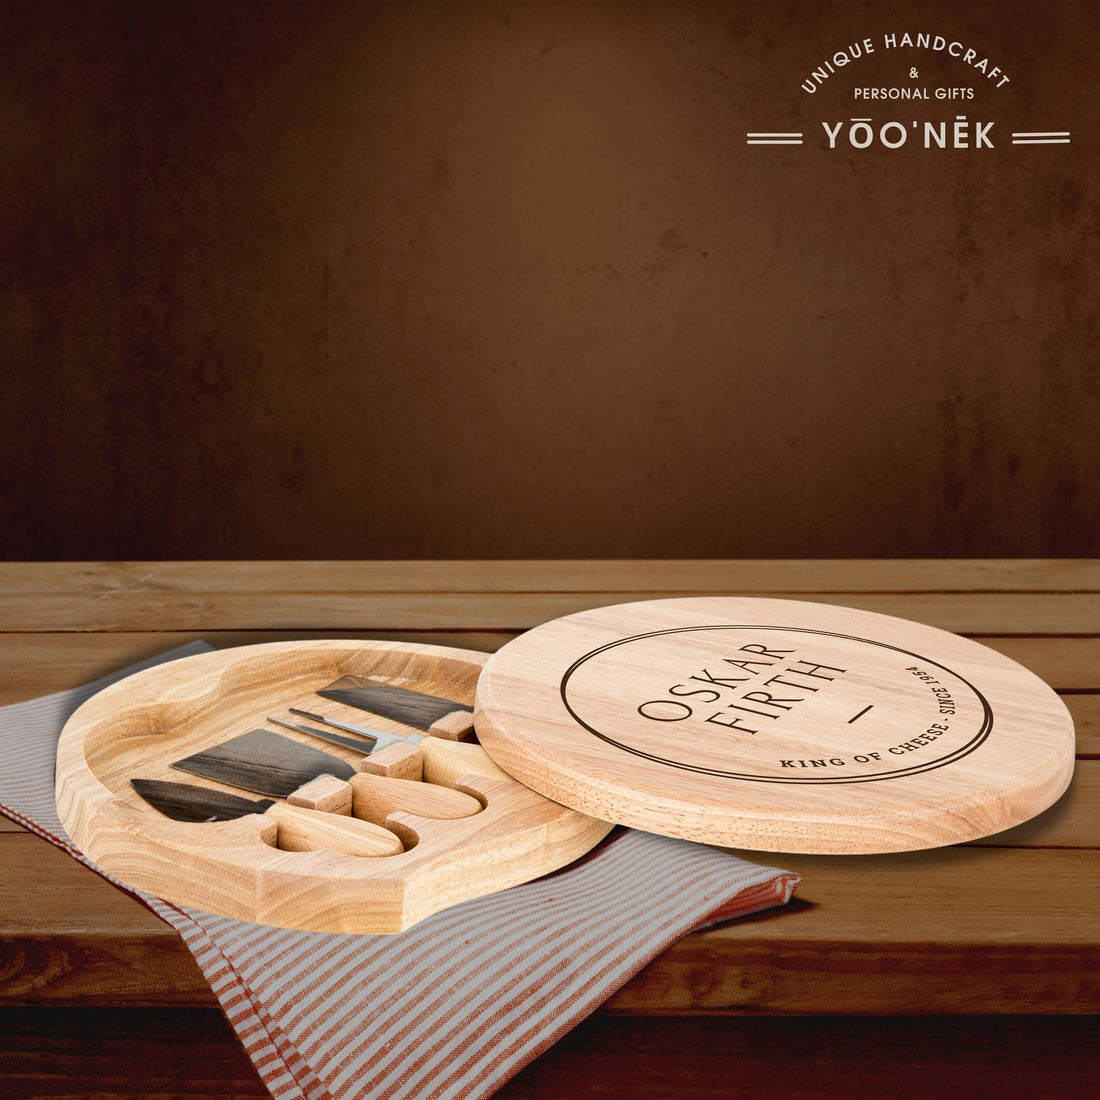 Personalised Round Wood Cheese Hinge Board & Knife Travel Set, Engraved Charcuterie Platter, Wedding Anniversary Corporate Housewarming Gift